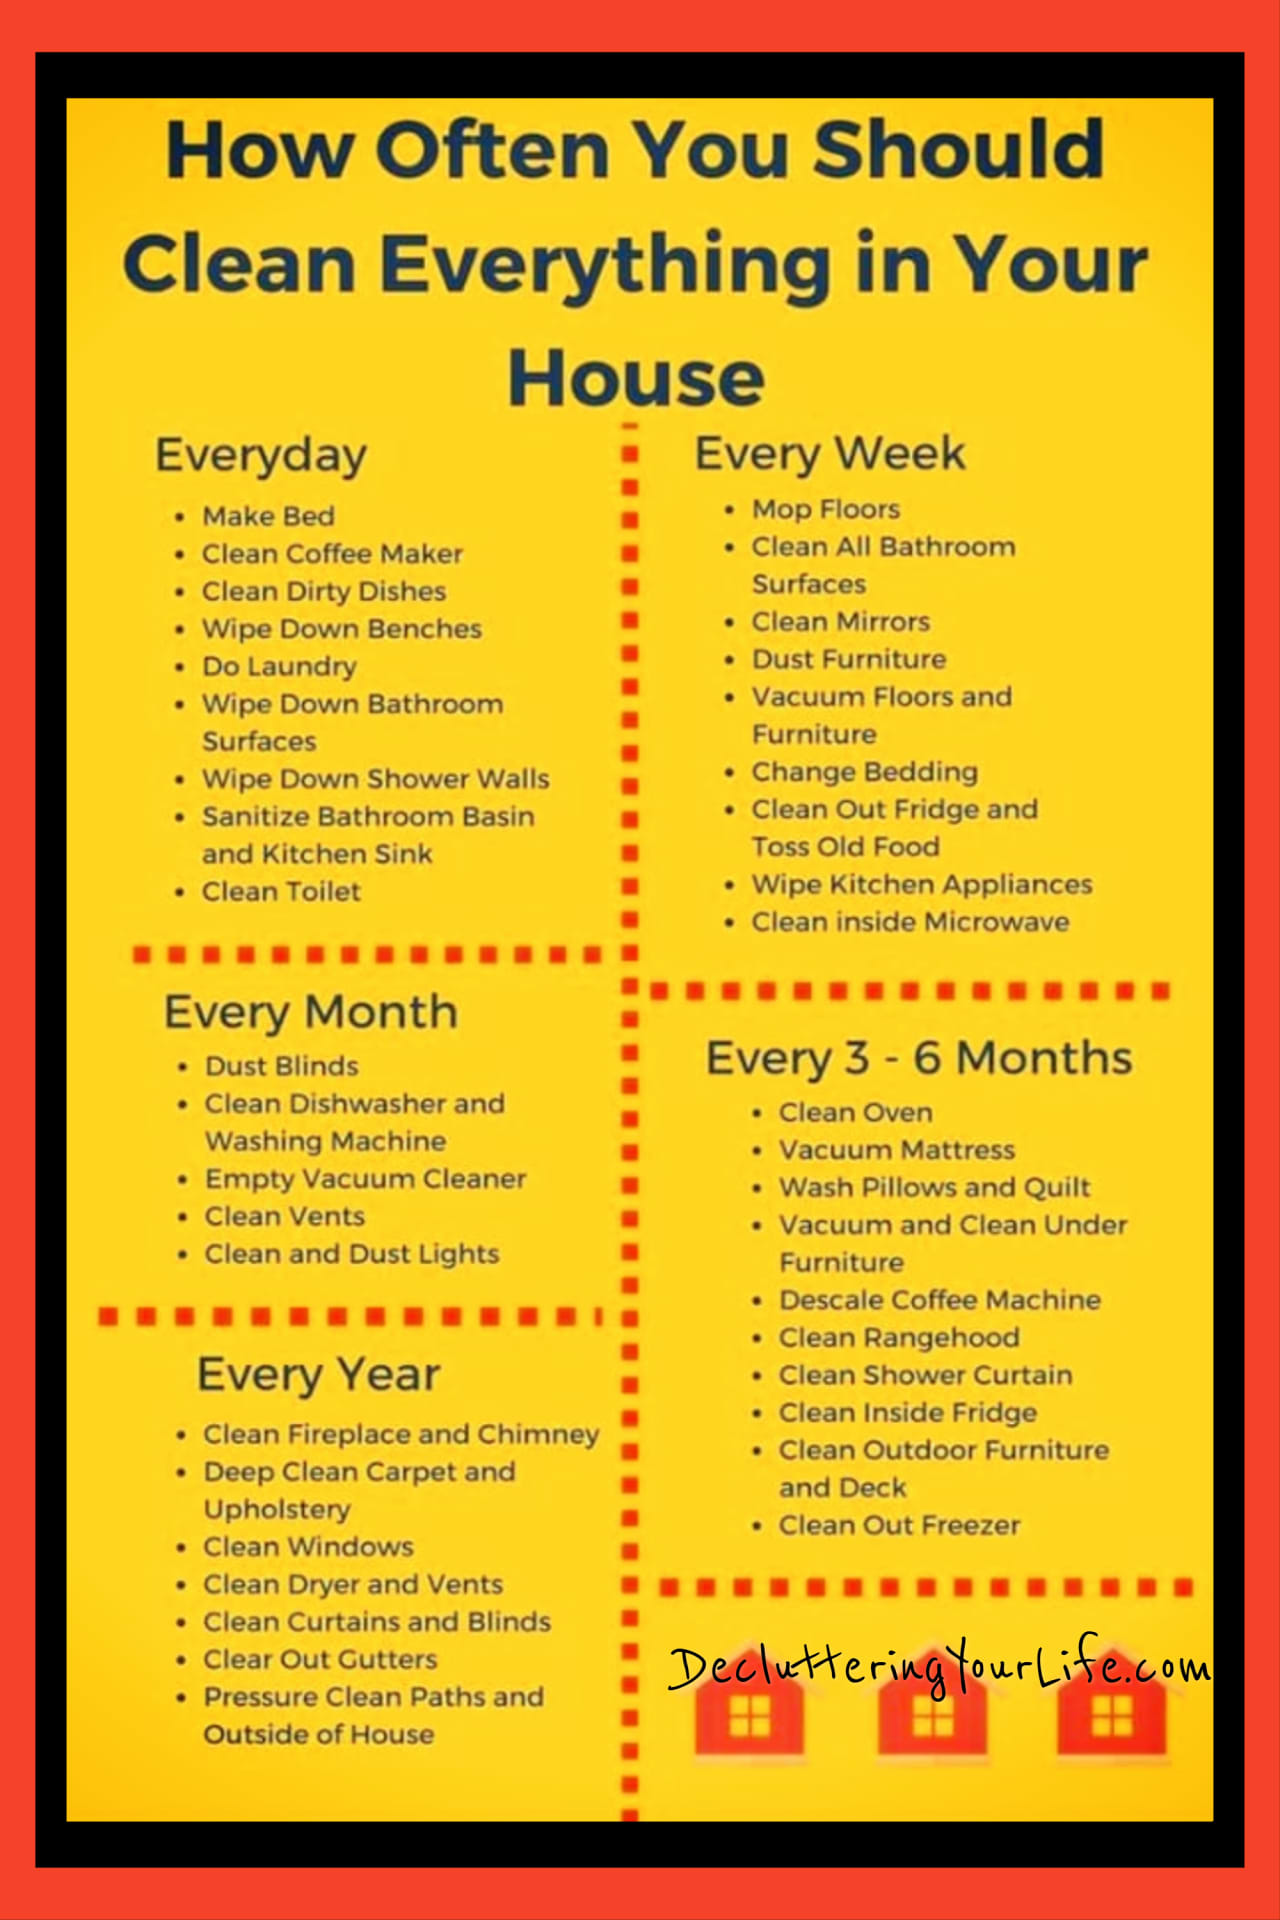 Home maintenance cleaning checklist chart - how often to clean things in your home.  Printable checklist and tips for when to clean everything in your house.  Daily, weekly and monthly cleaning schedules too!